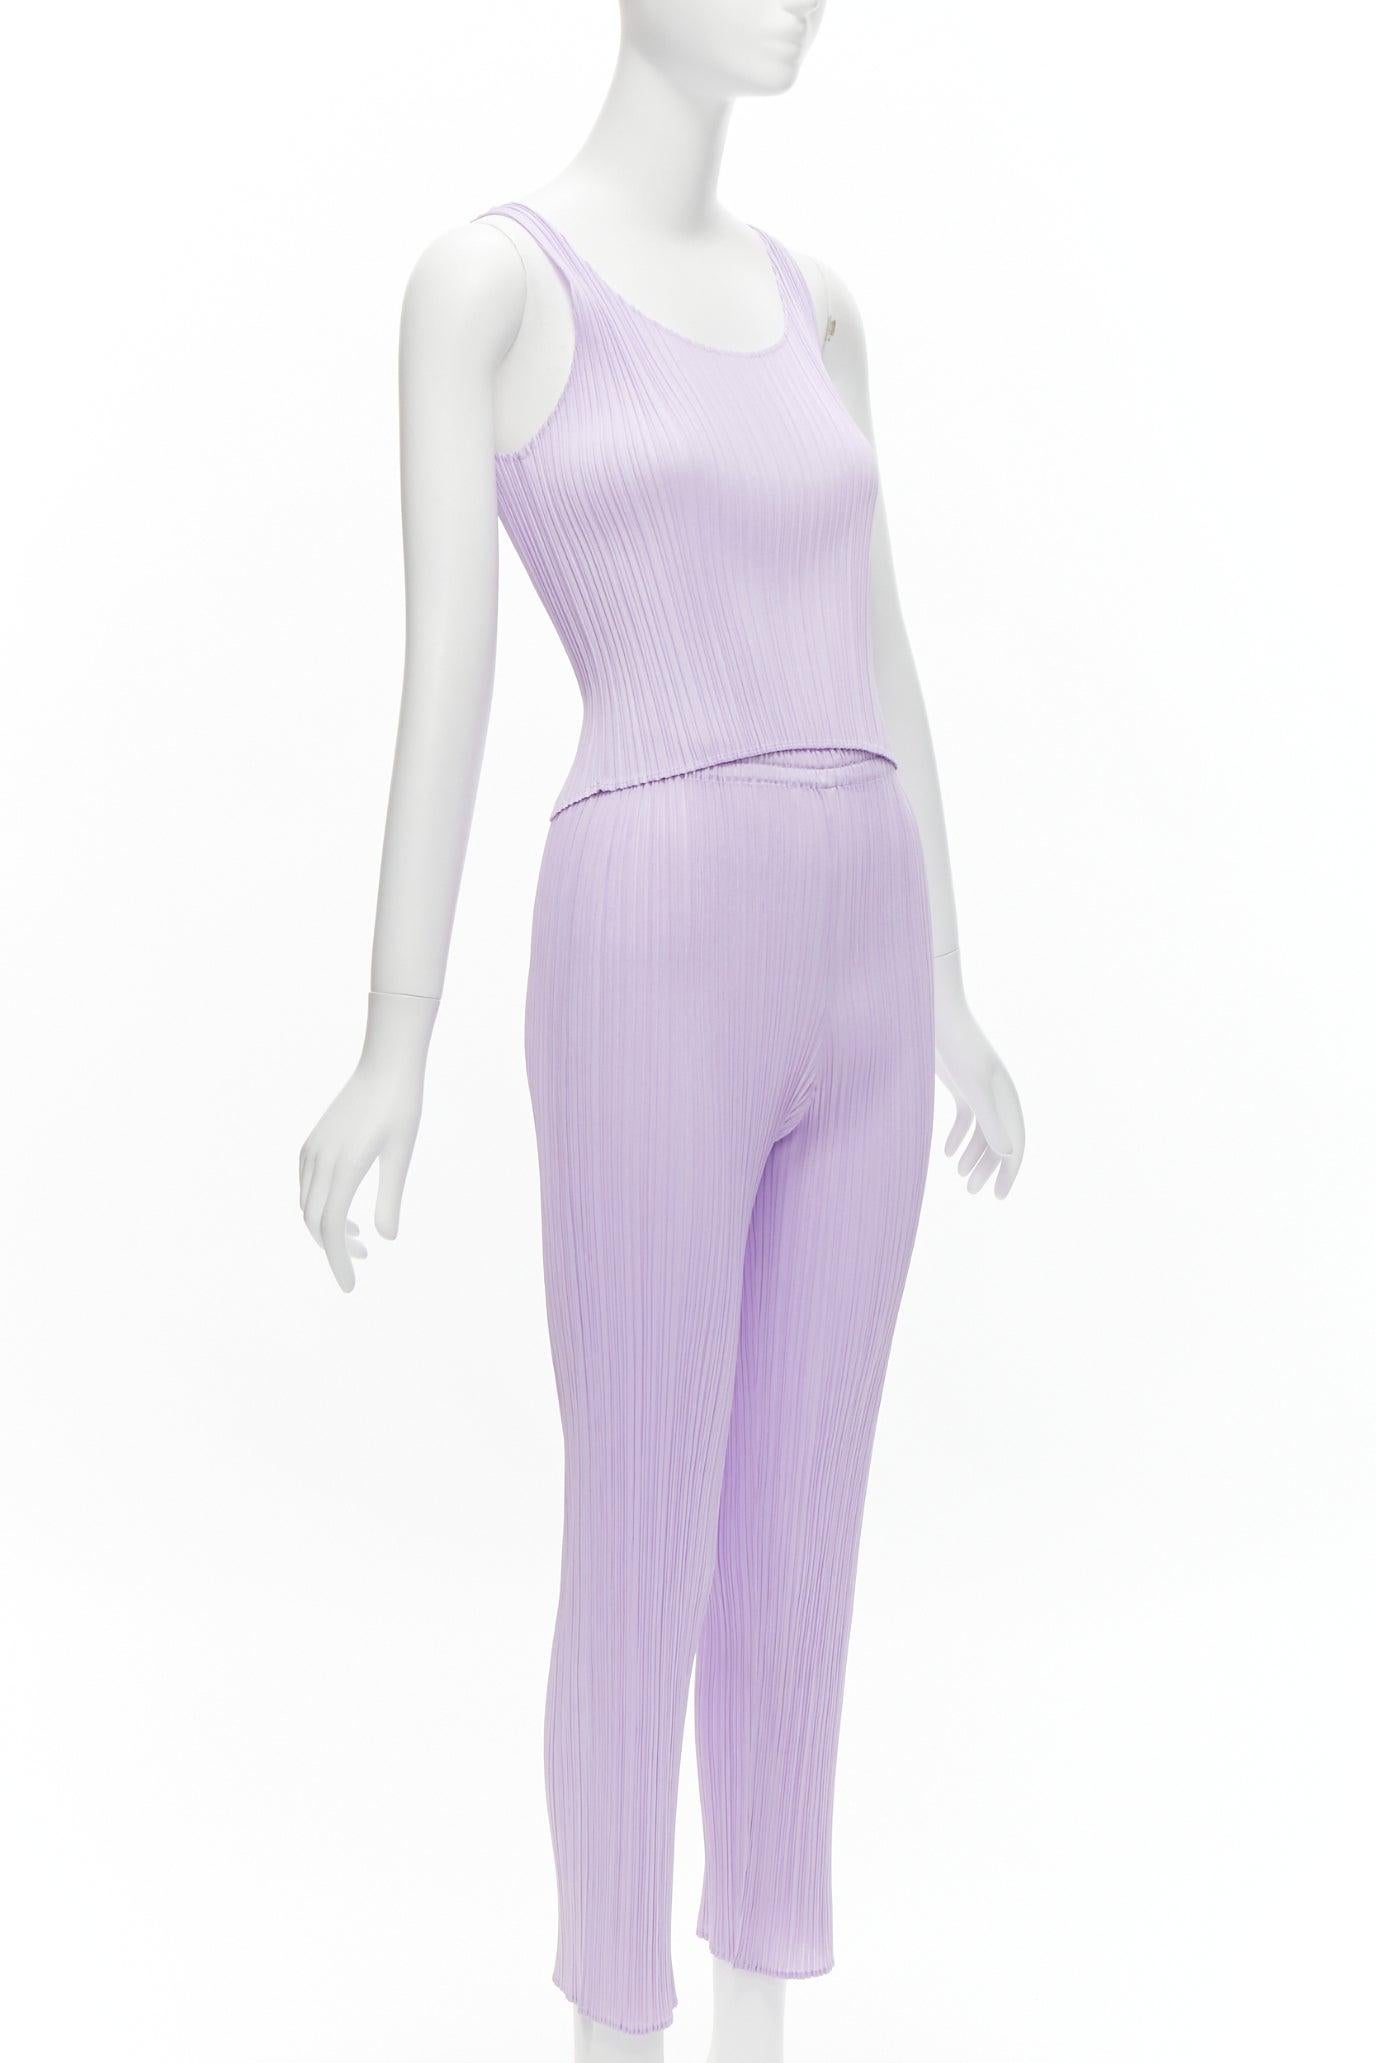 ISSEY MIYAKE Pleats Please lilac purple plisse tank top slim pants set F
Reference: TGAS/D00518
Brand: Issey Miyake
Collection: Pleats Please
Material: Polyester
Color: Purple
Pattern: Solid
Closure: Pullover
Made in: Japan

CONDITION:
Condition: